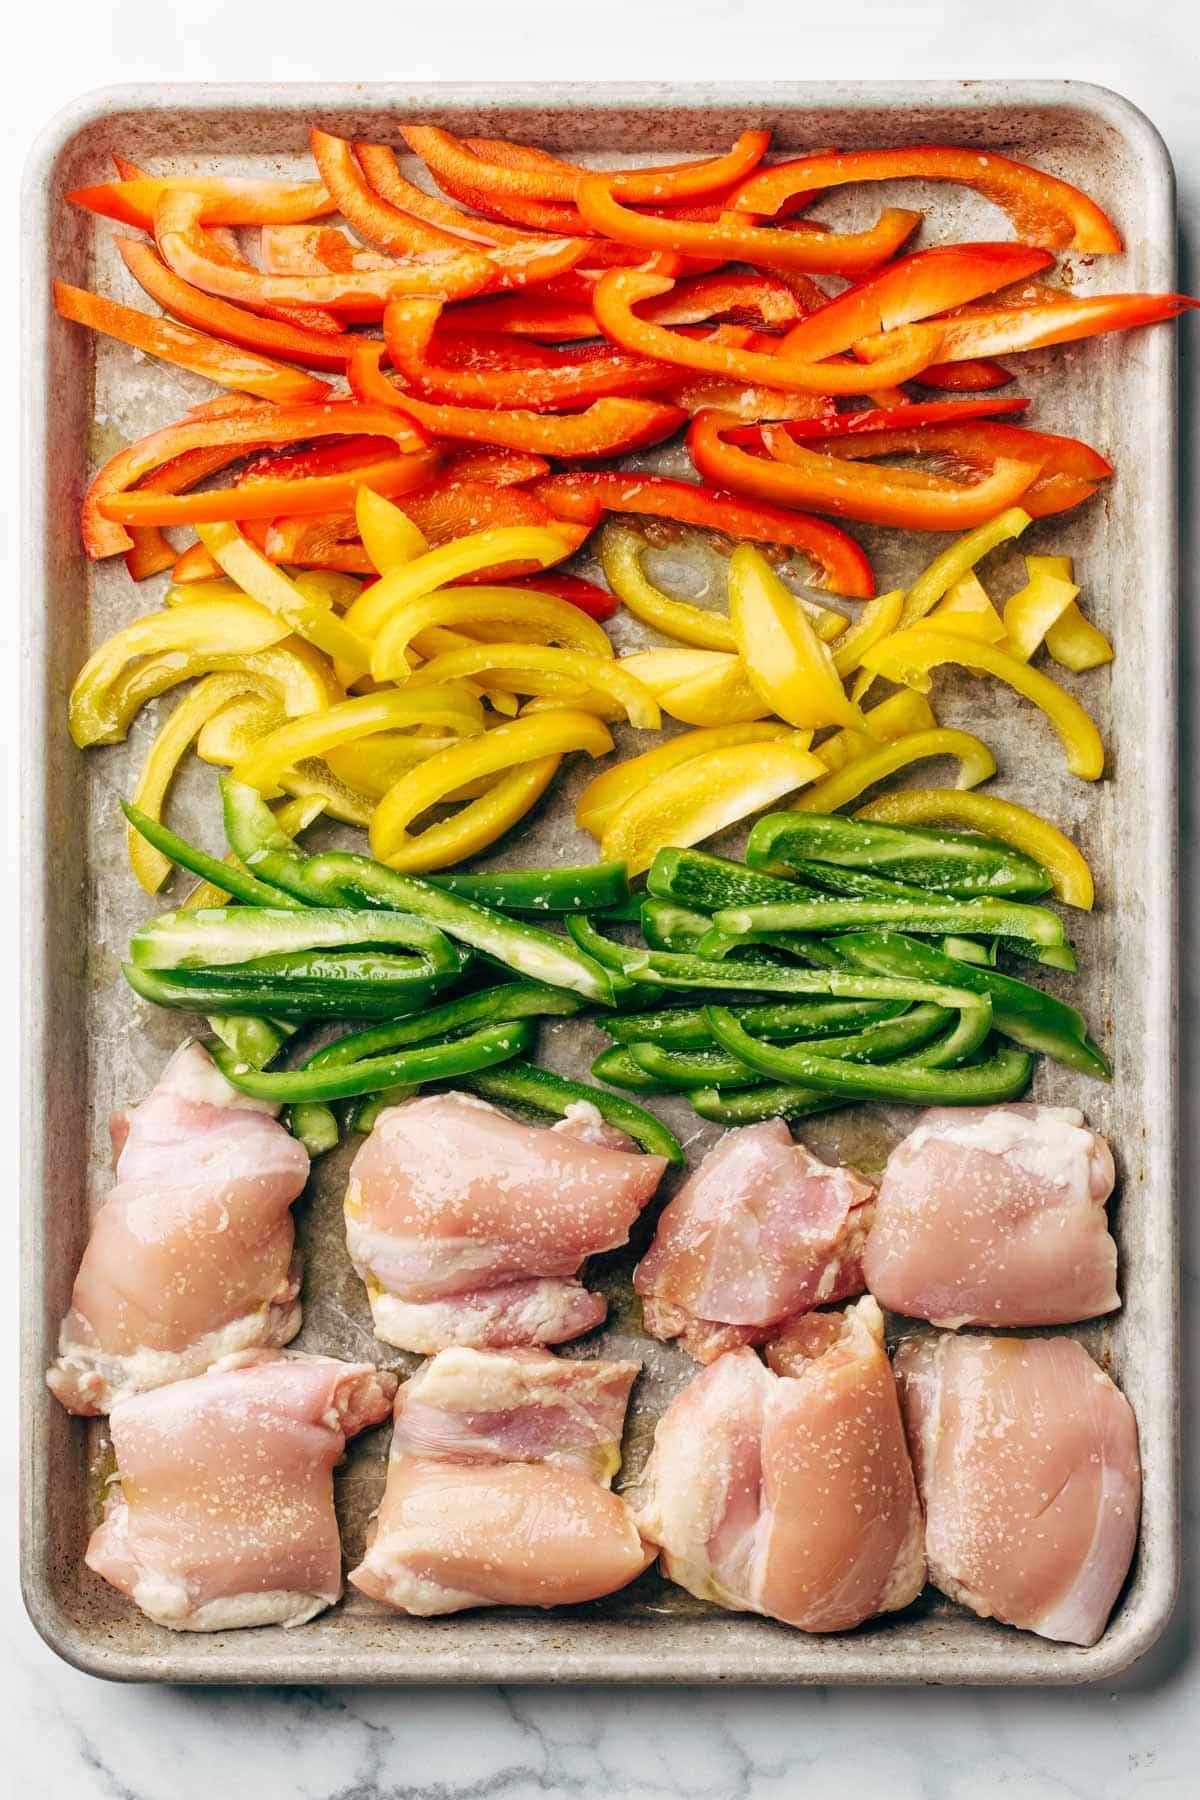 Various colors of peppers on a baking sheet with chicken breasts.